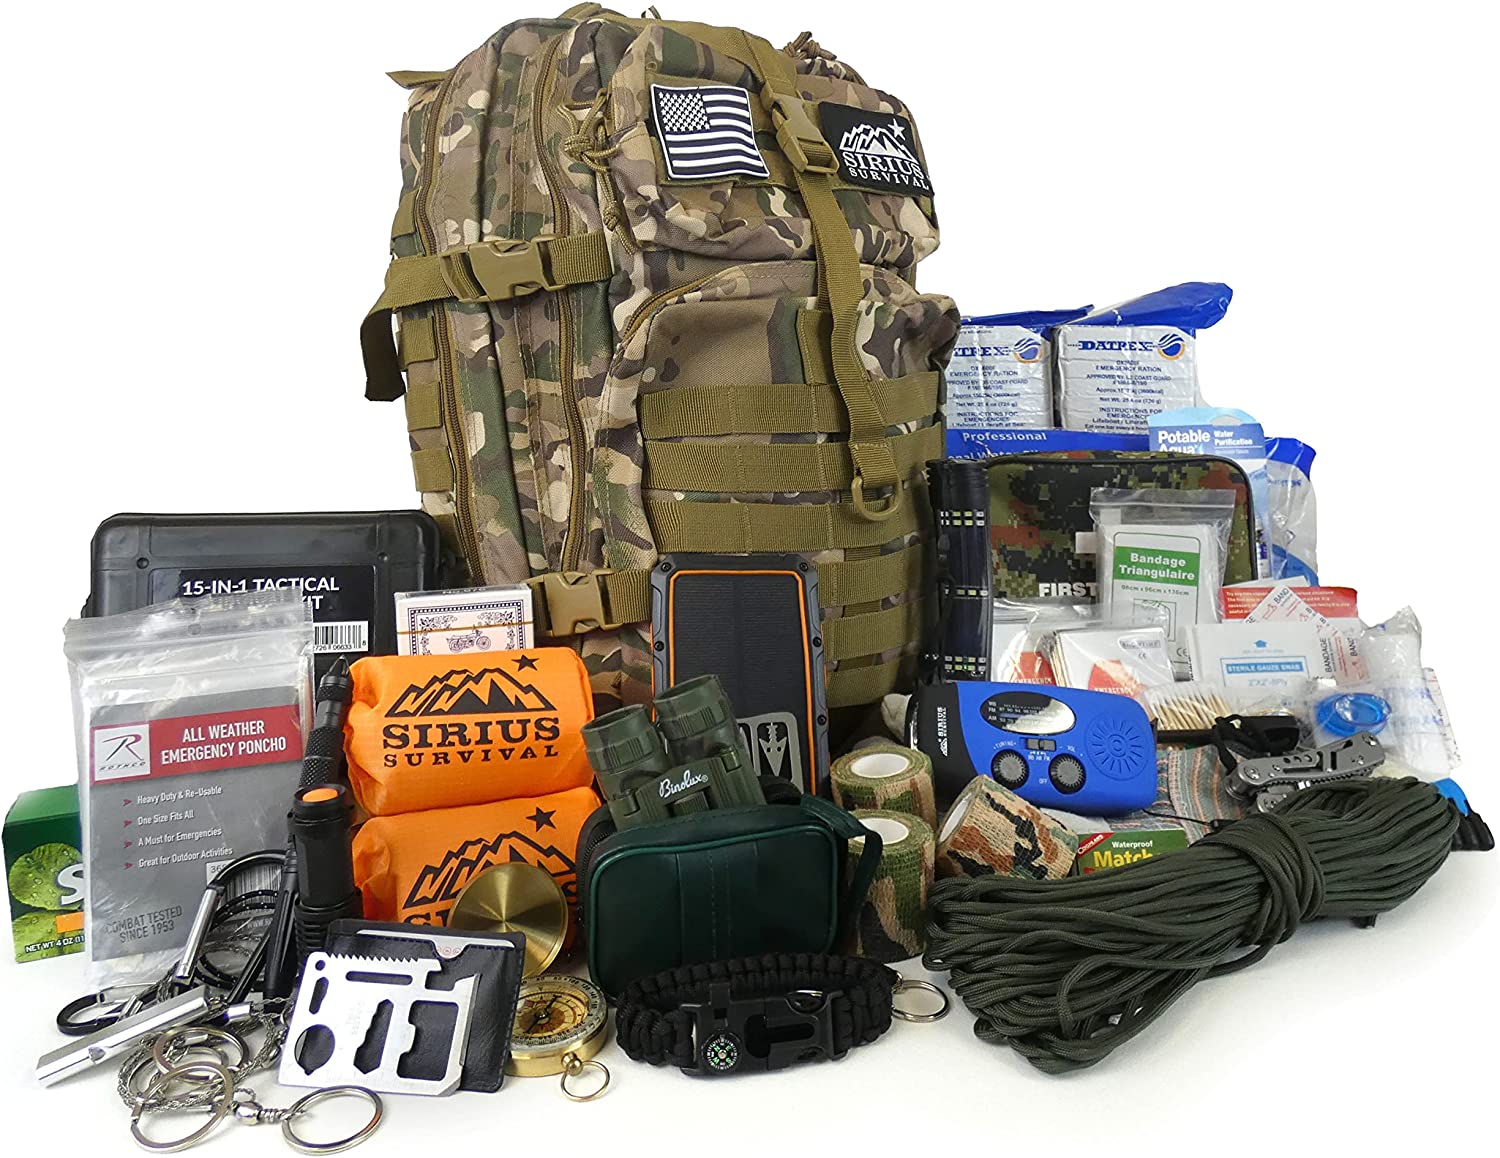 Pre-Packed Emergency Survival Kit/Bug Out Bag for 2 – Over 150 Total Pieces of Disaster Preparedness Supplies for Hurricanes, Floods, Earth Quakes & Other Disasters